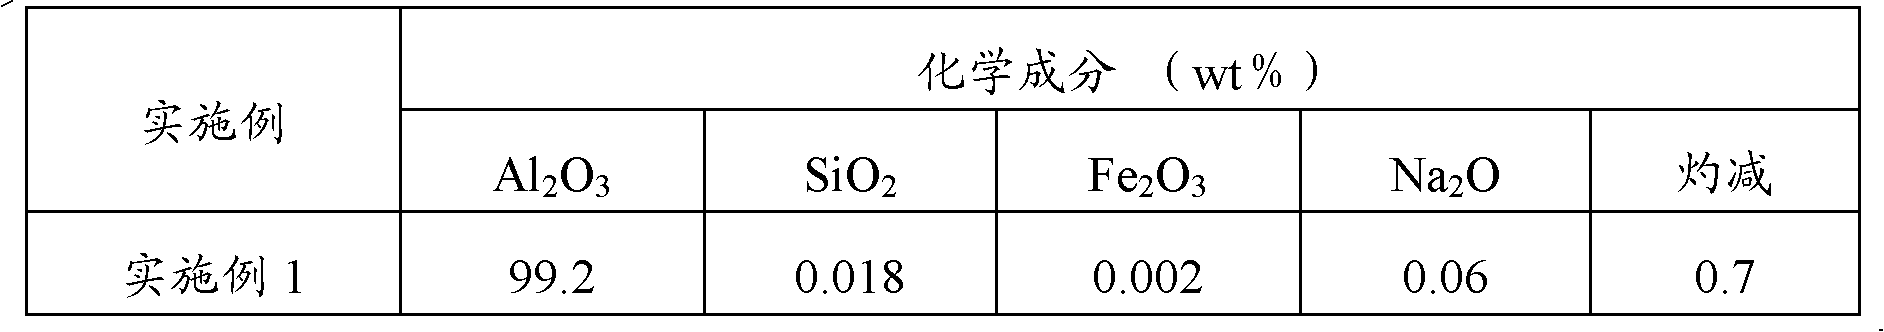 Method for preparing metallurgy-level aluminum oxide by using fluidized bed pulverized fuel ash